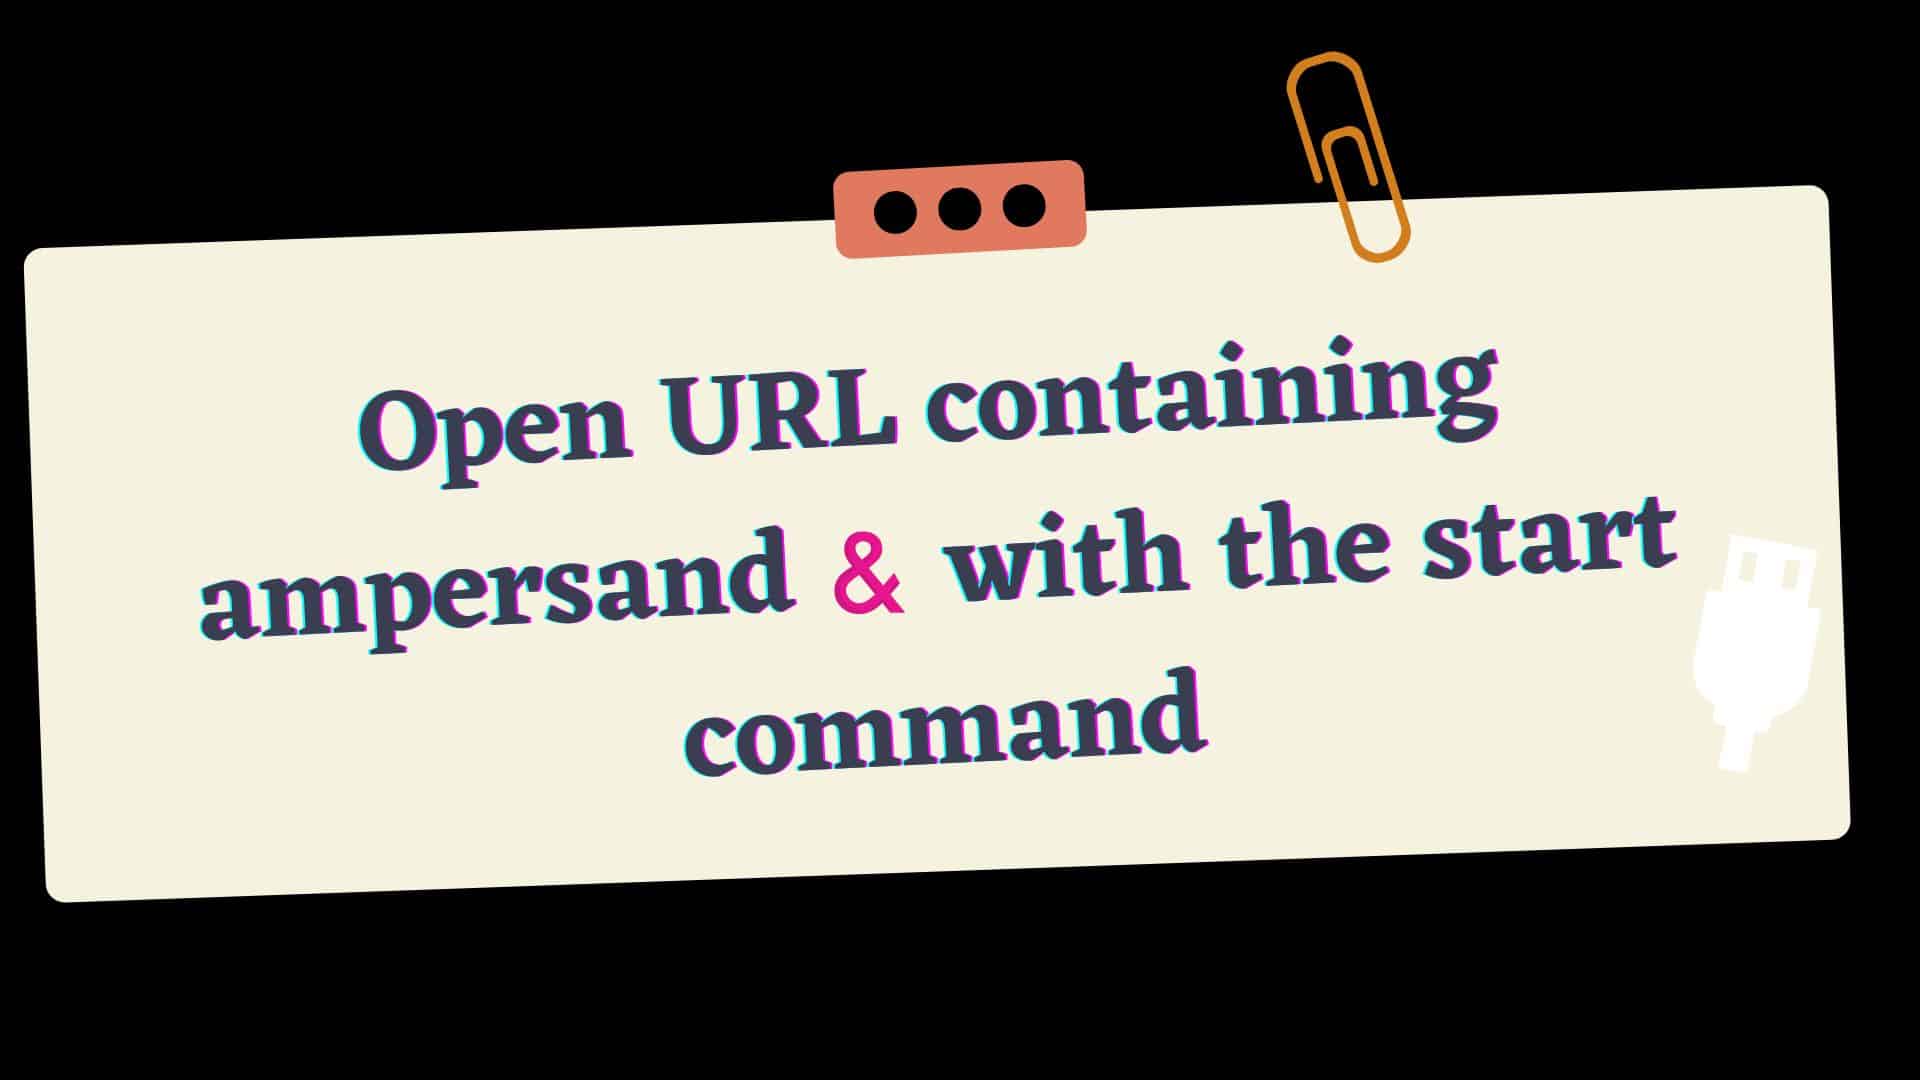 open-ampersand-containing-url-with-start-command